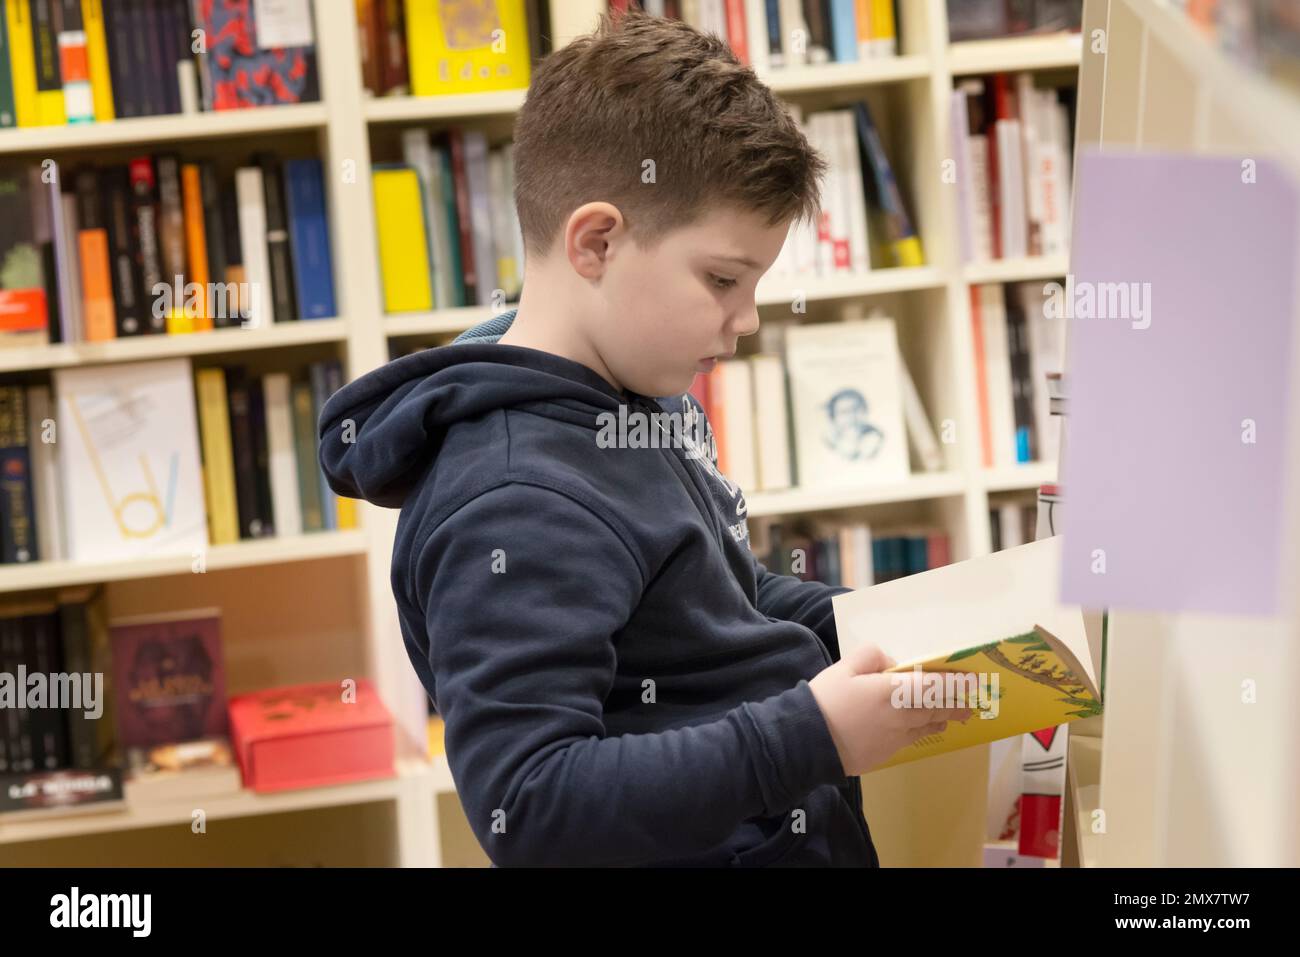 Boy Taking Book From Shelf in Bookstore Stock Photo